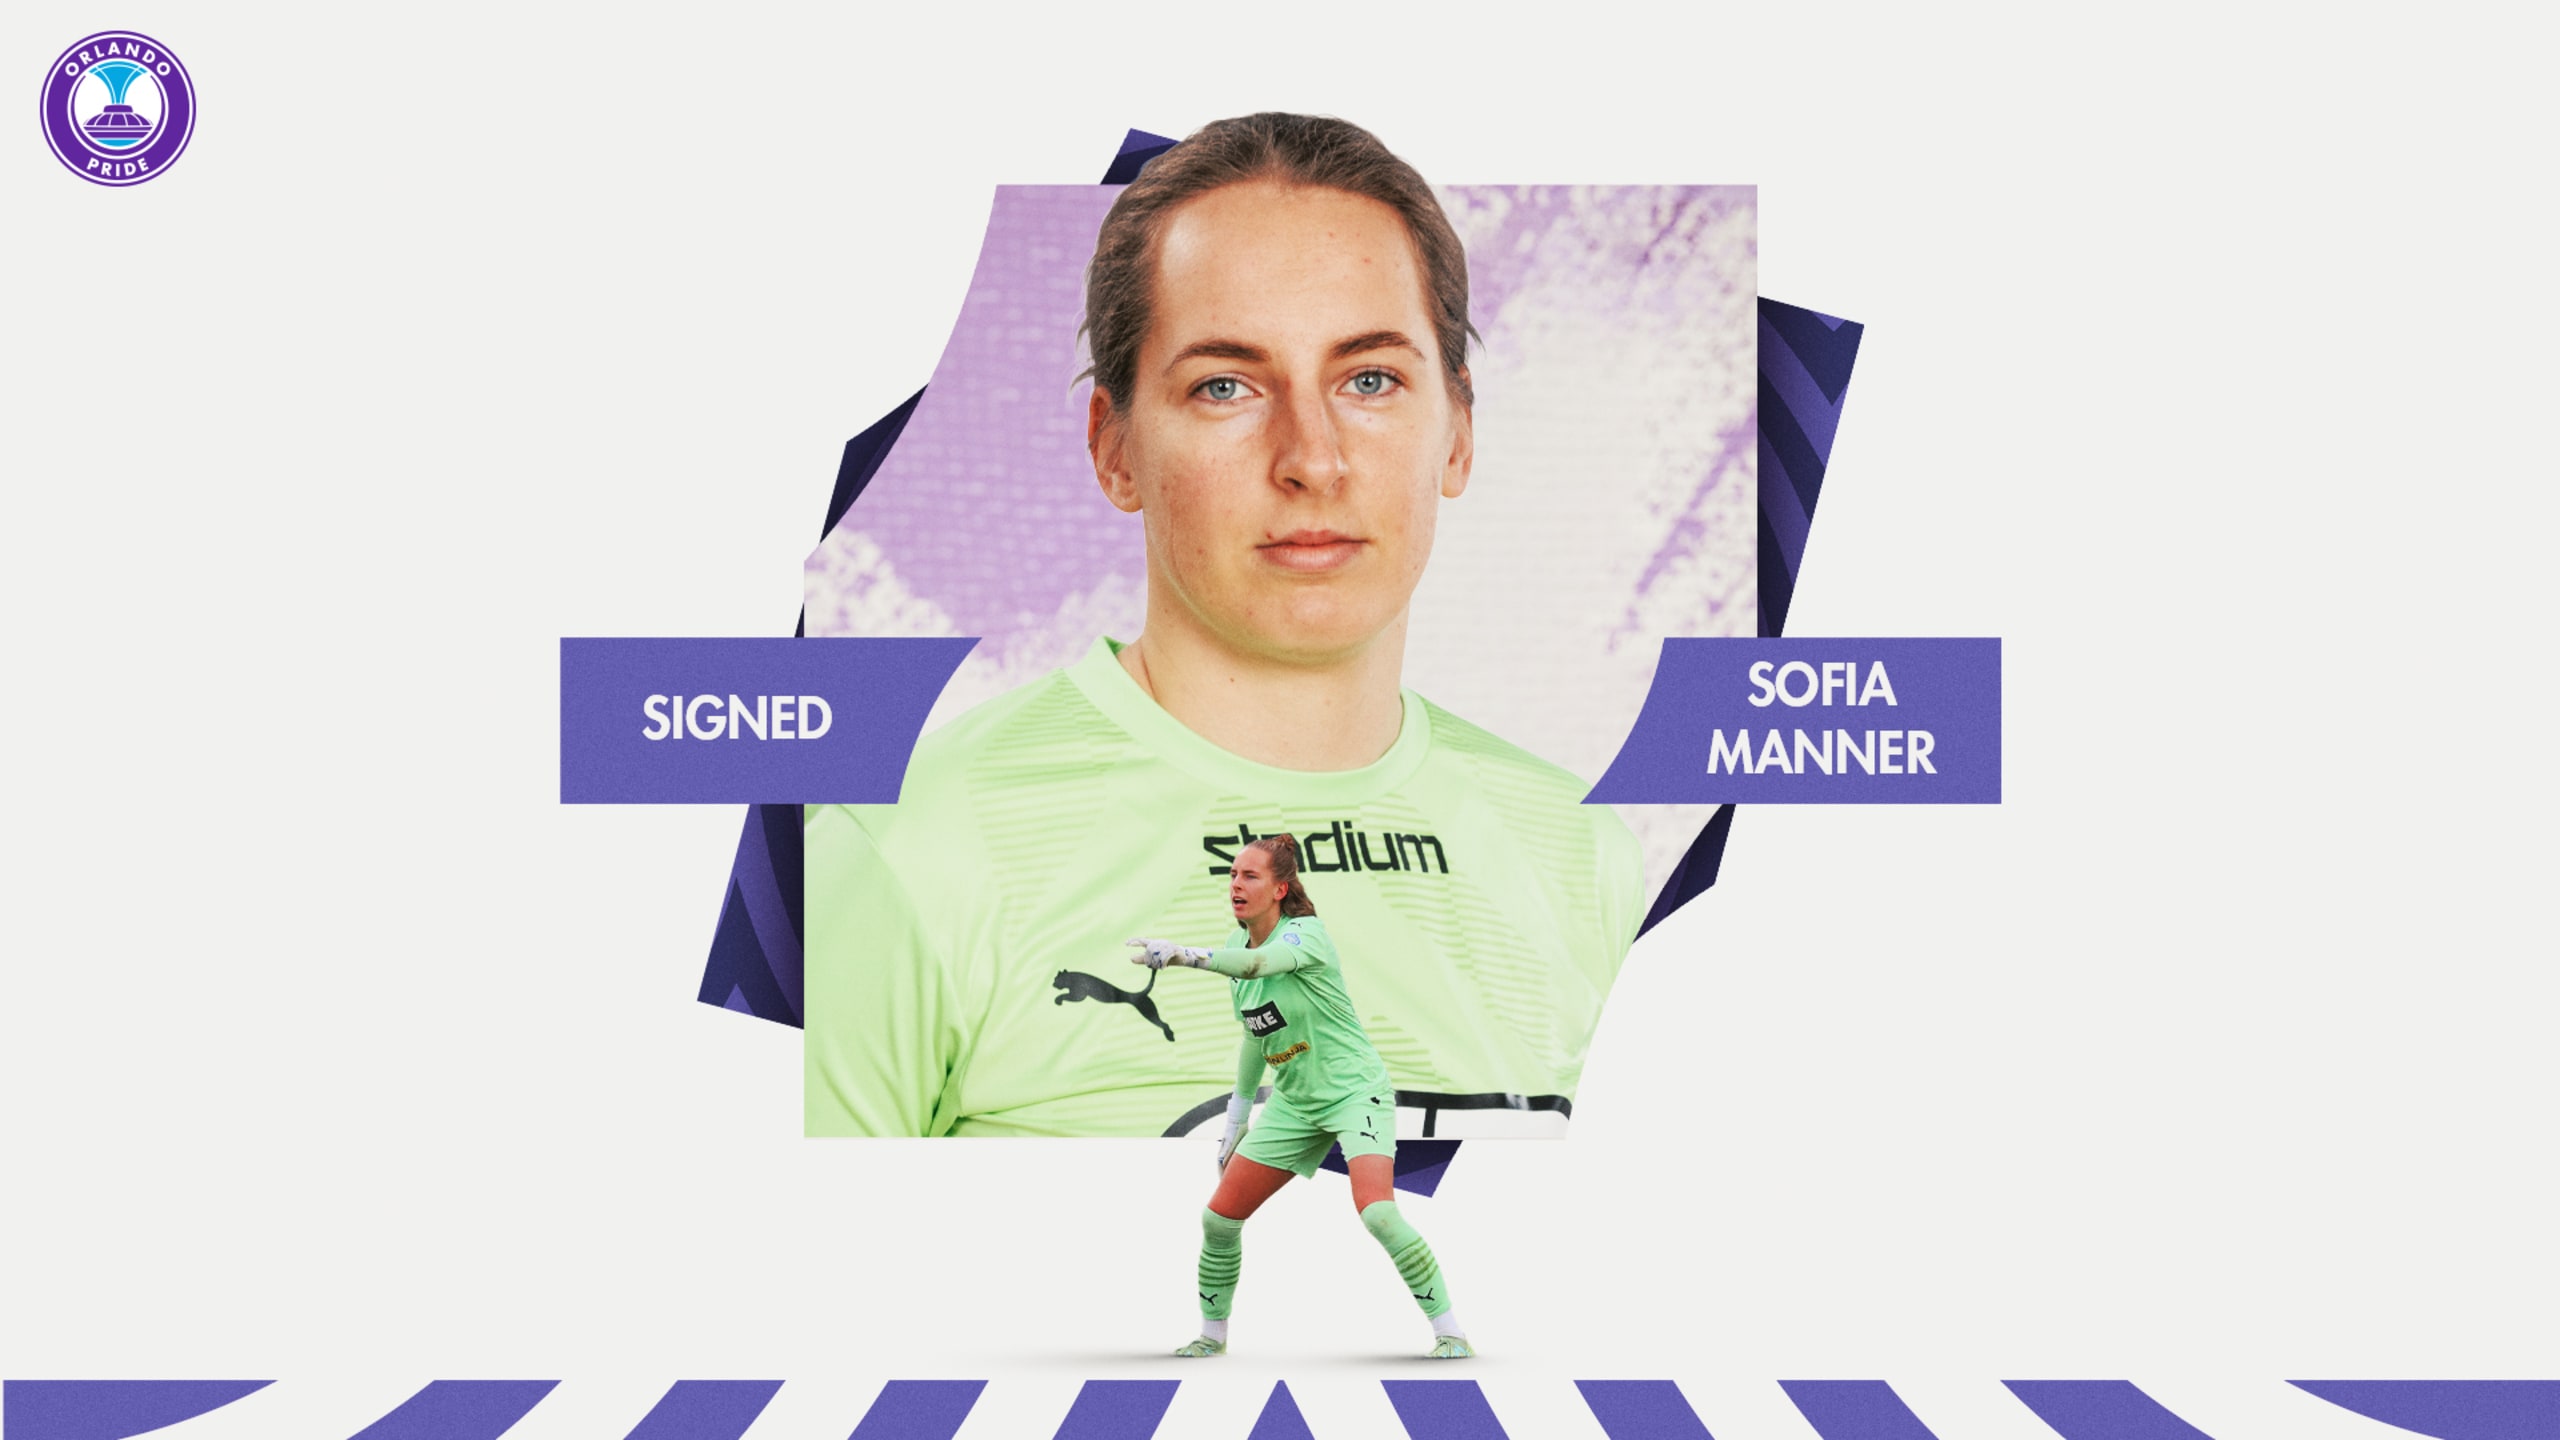 Orlando Pride announce the signing of goalkeeper Sofia Manner through the 2025 season, with an option for 2026